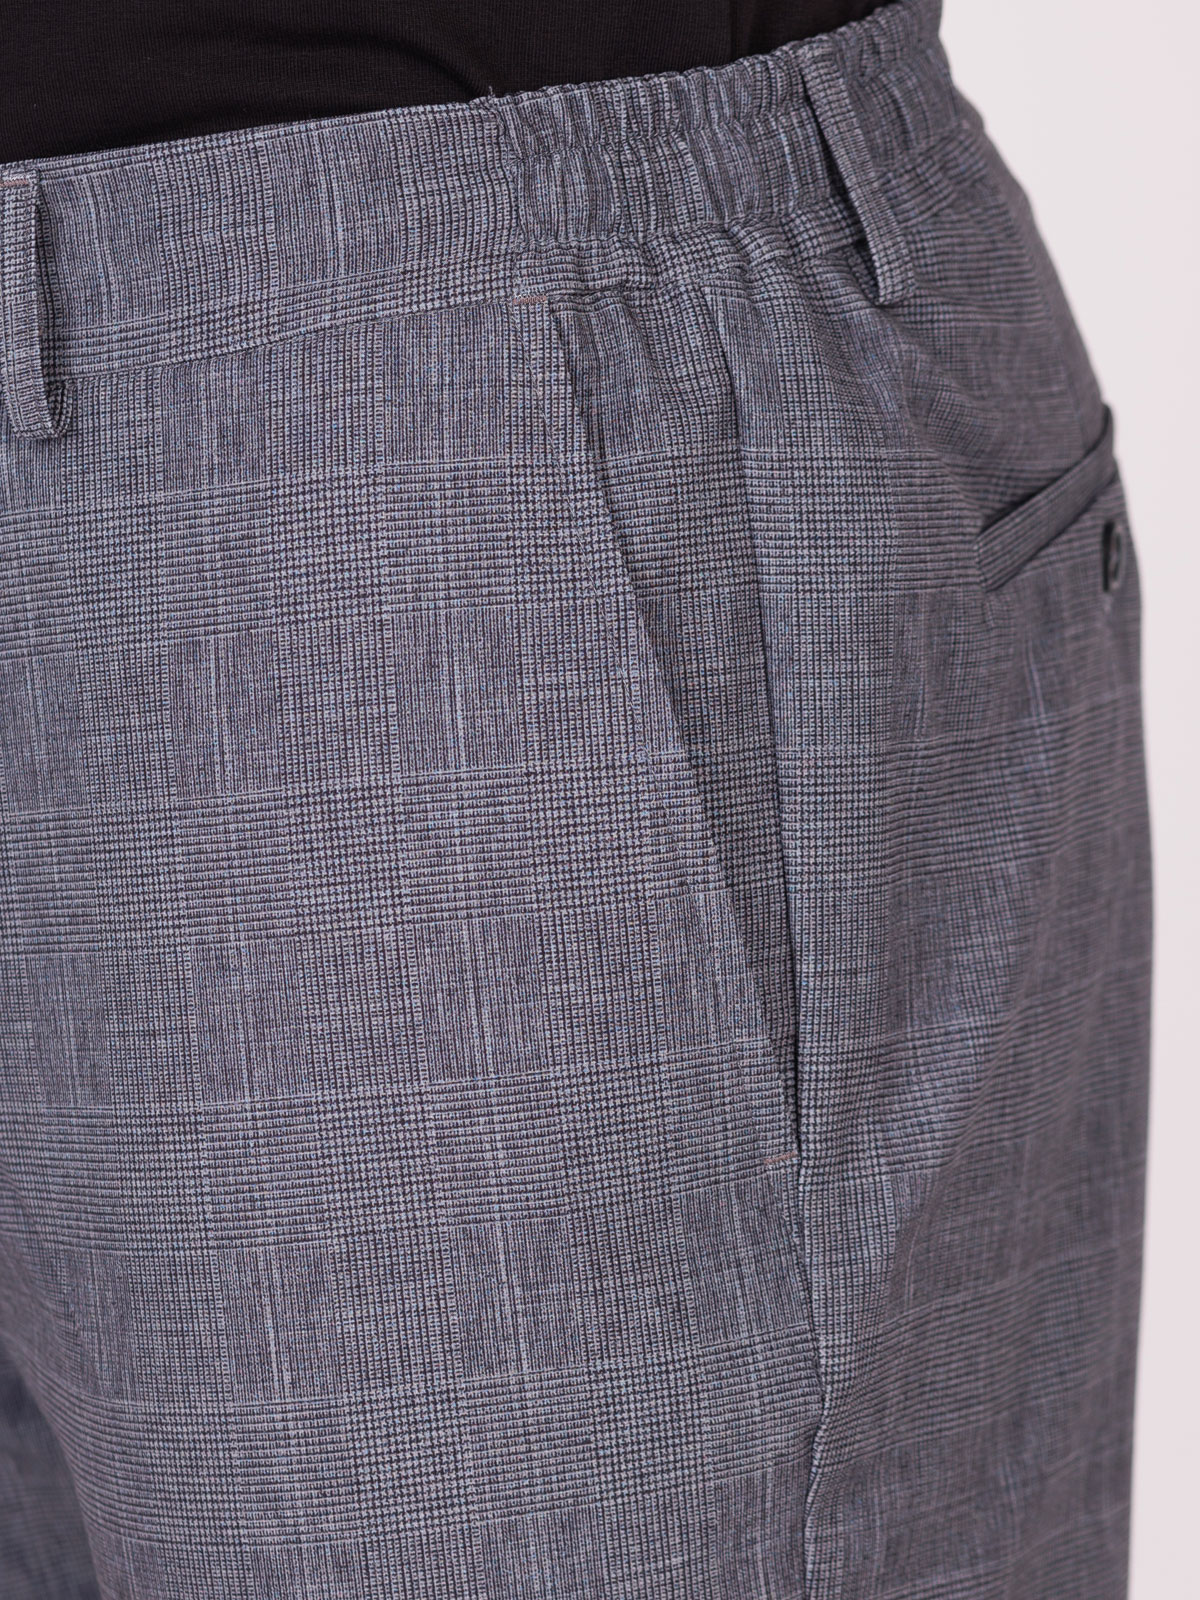 Mens trousers in light grey - 29006 € 55.12 img3